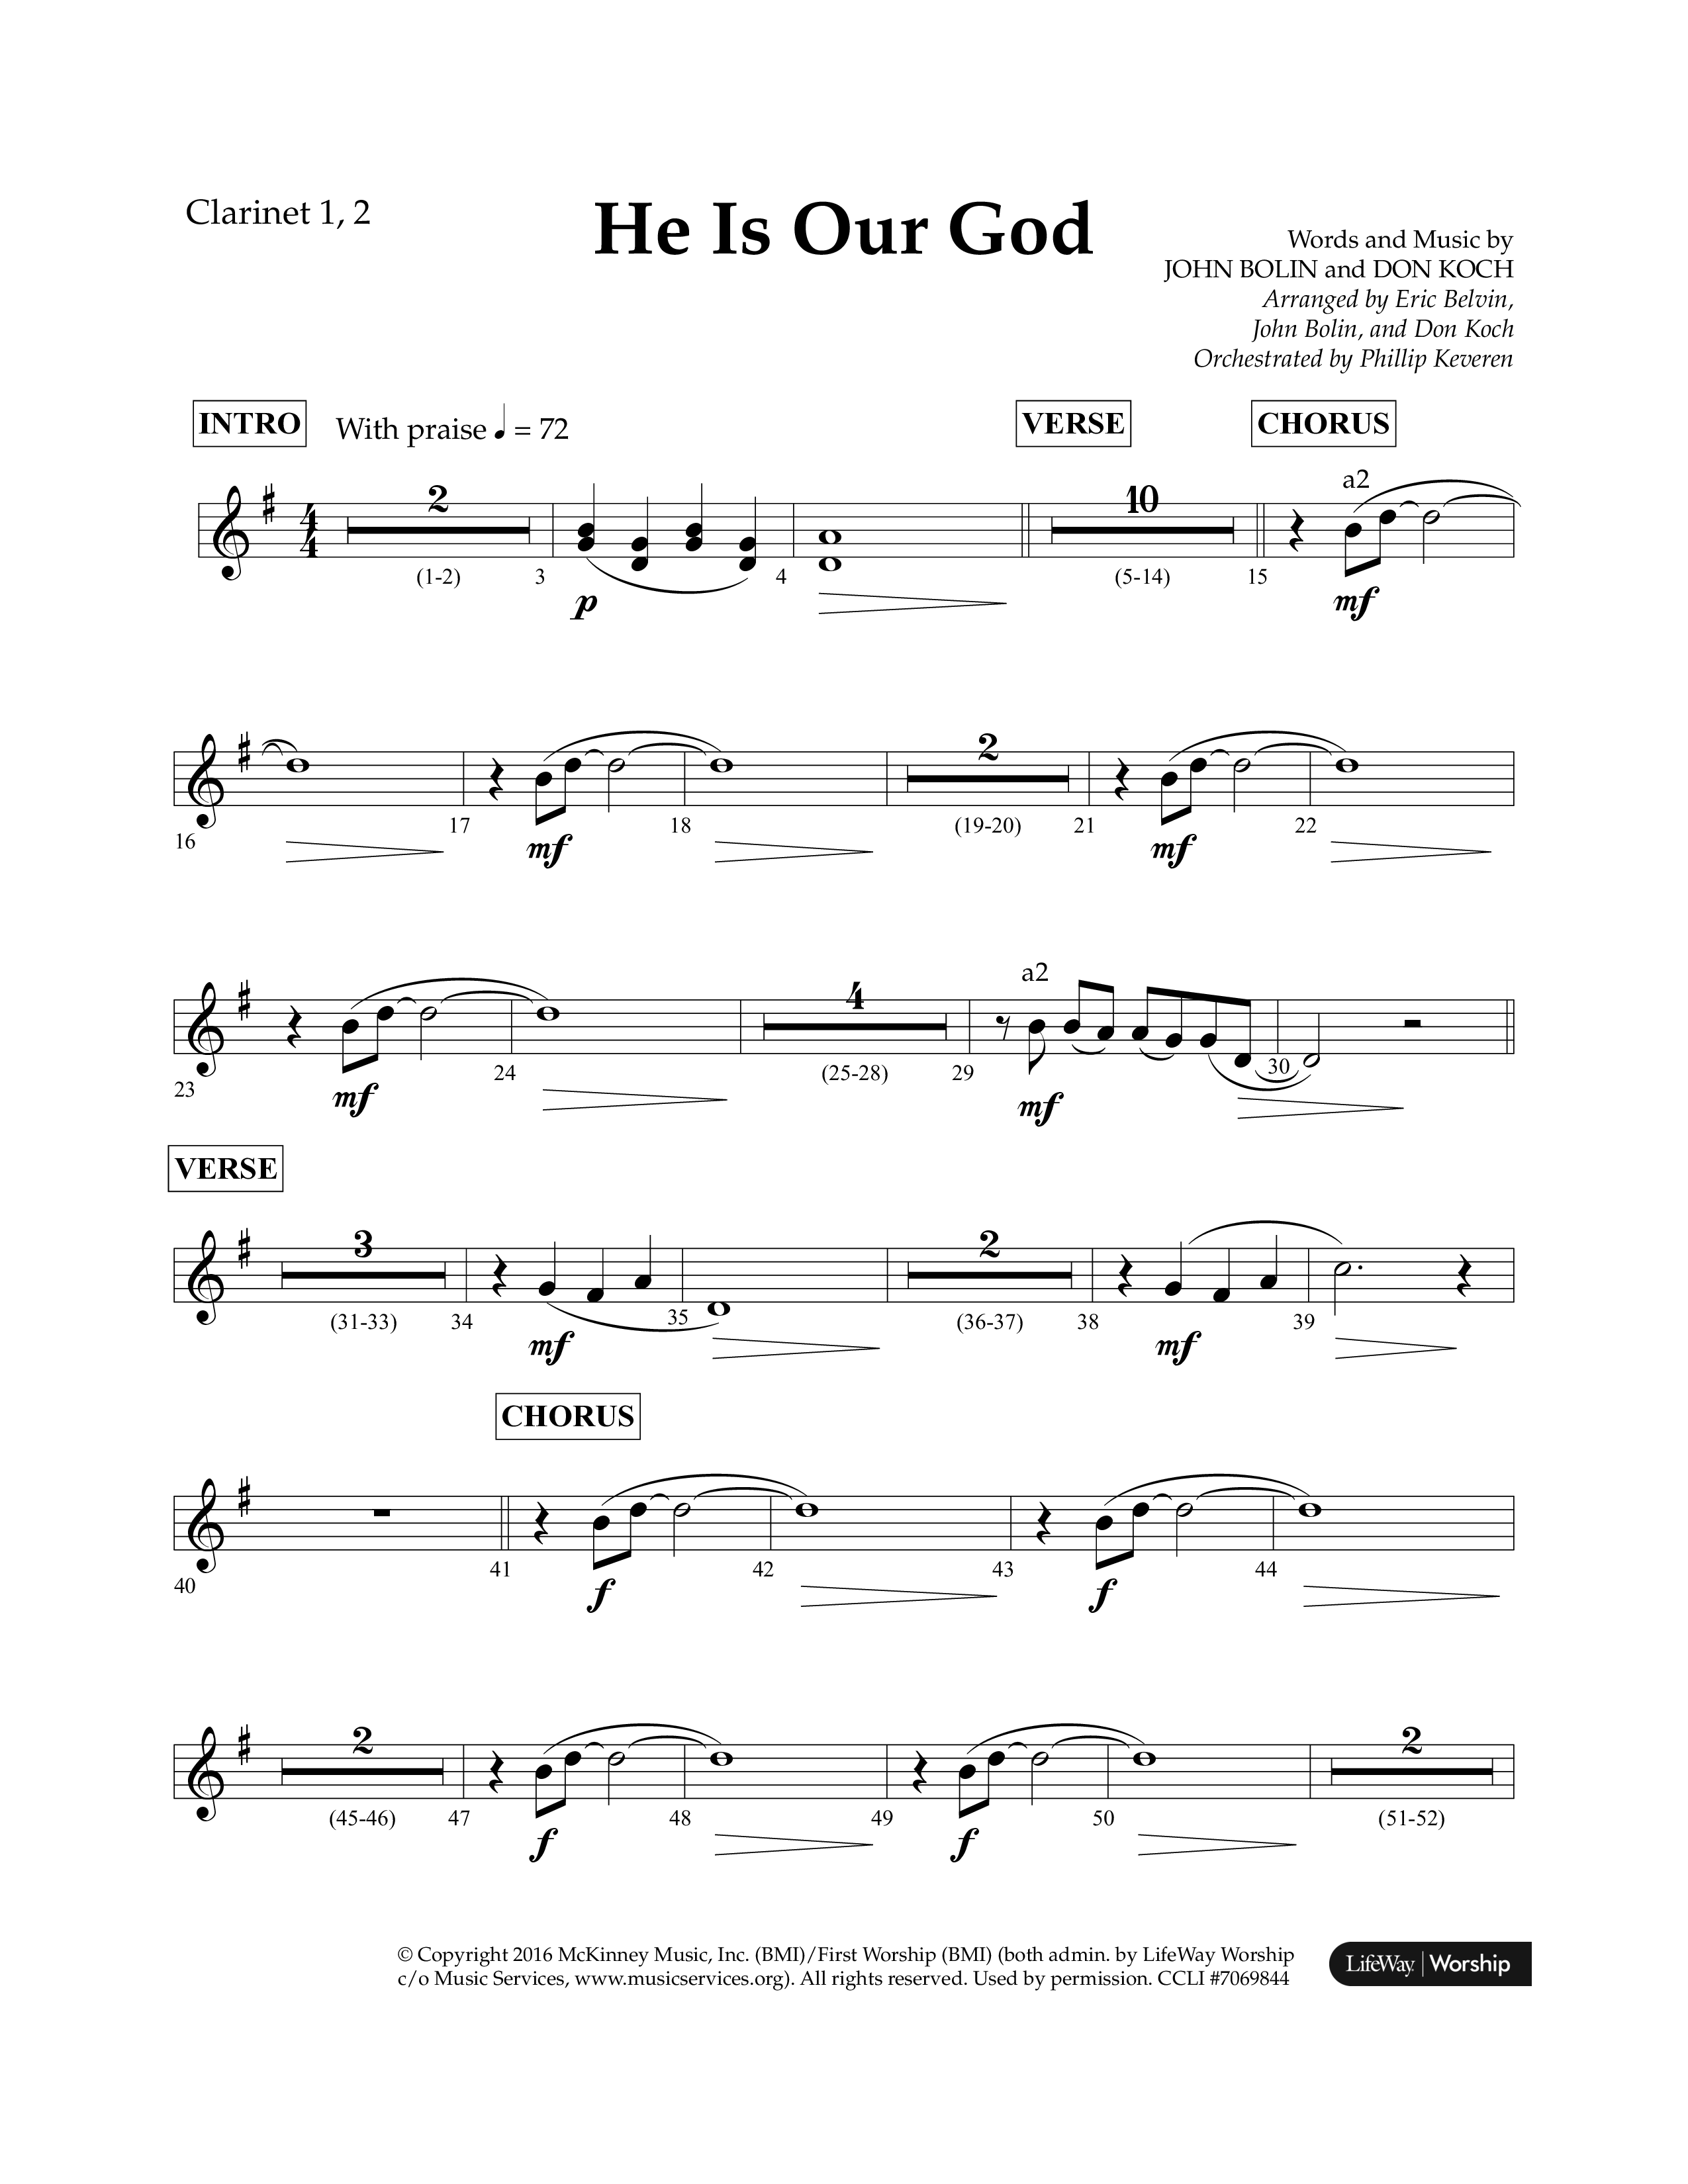 He Is Our God (Choral Anthem SATB) Clarinet 1/2 (Lifeway Choral / Arr. John Bolin / Arr. Don Koch / Arr. Eric Belvin / Orch. Phillip Keveren)